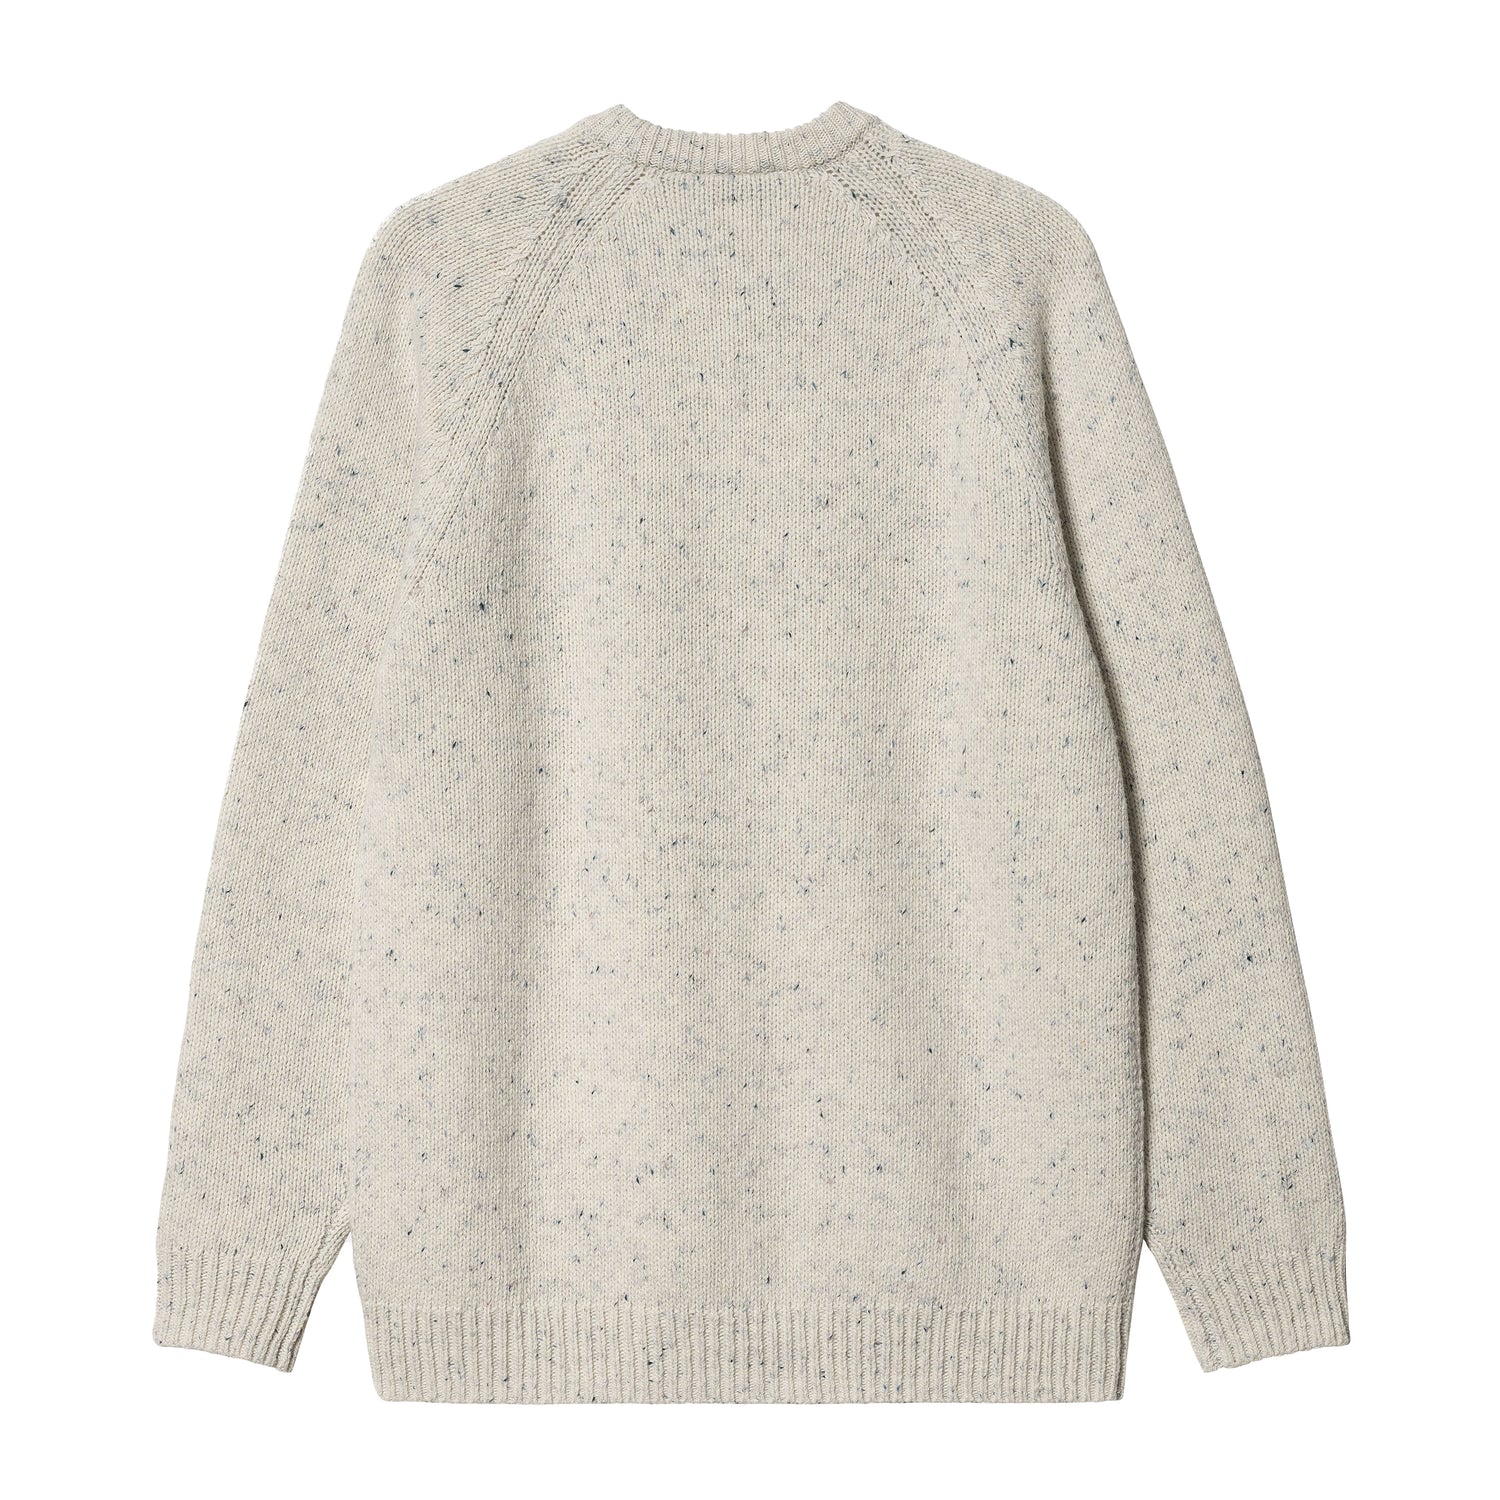 ANGLISTIC SWEATER SPECKLED SALT